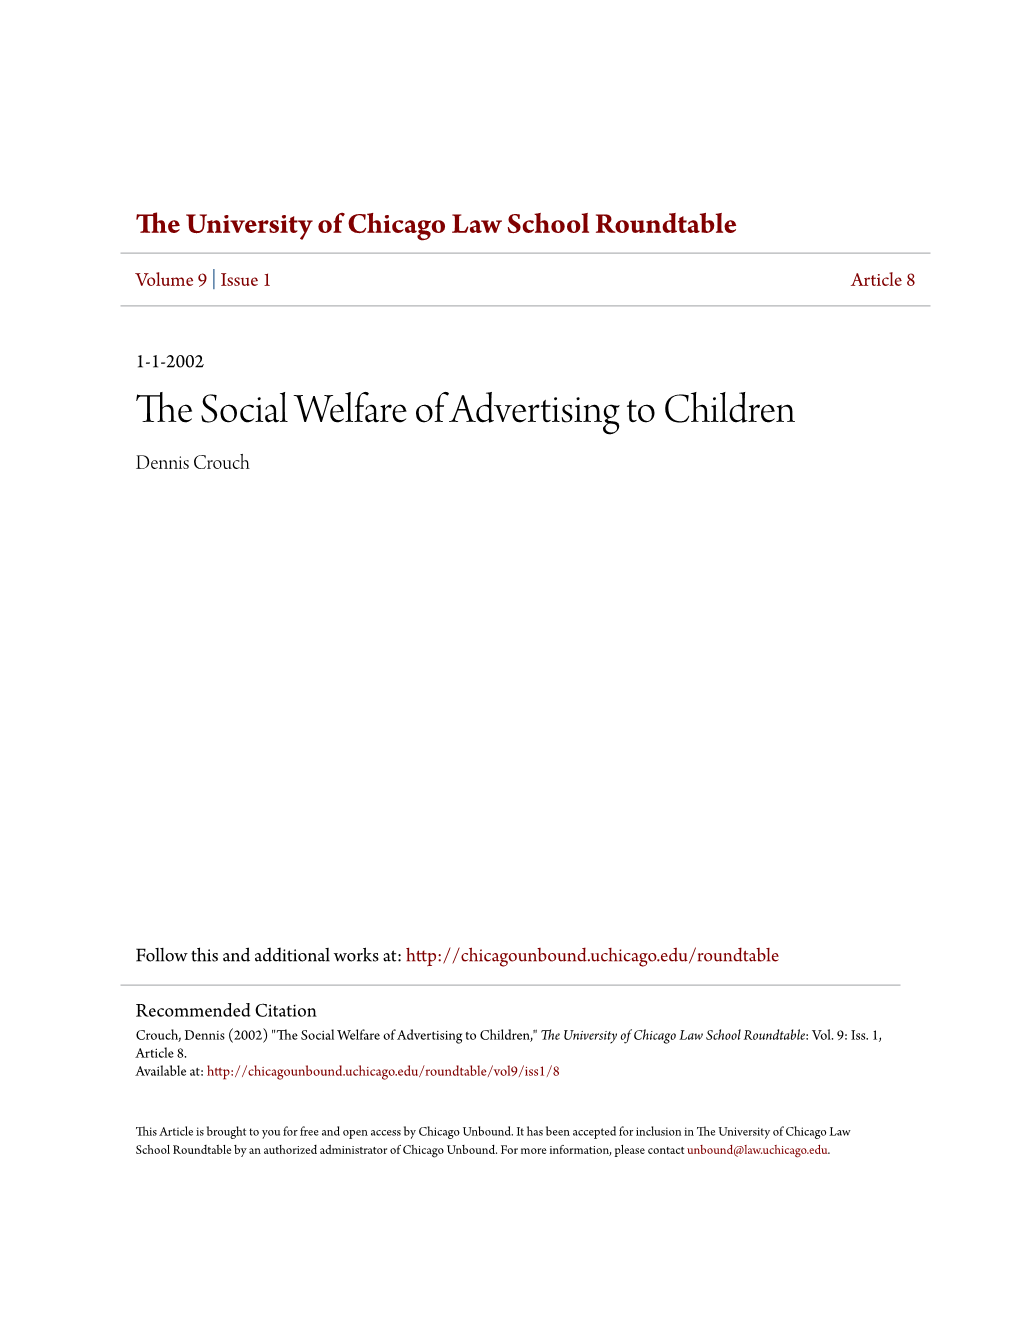 The Social Welfare of Advertising to Children